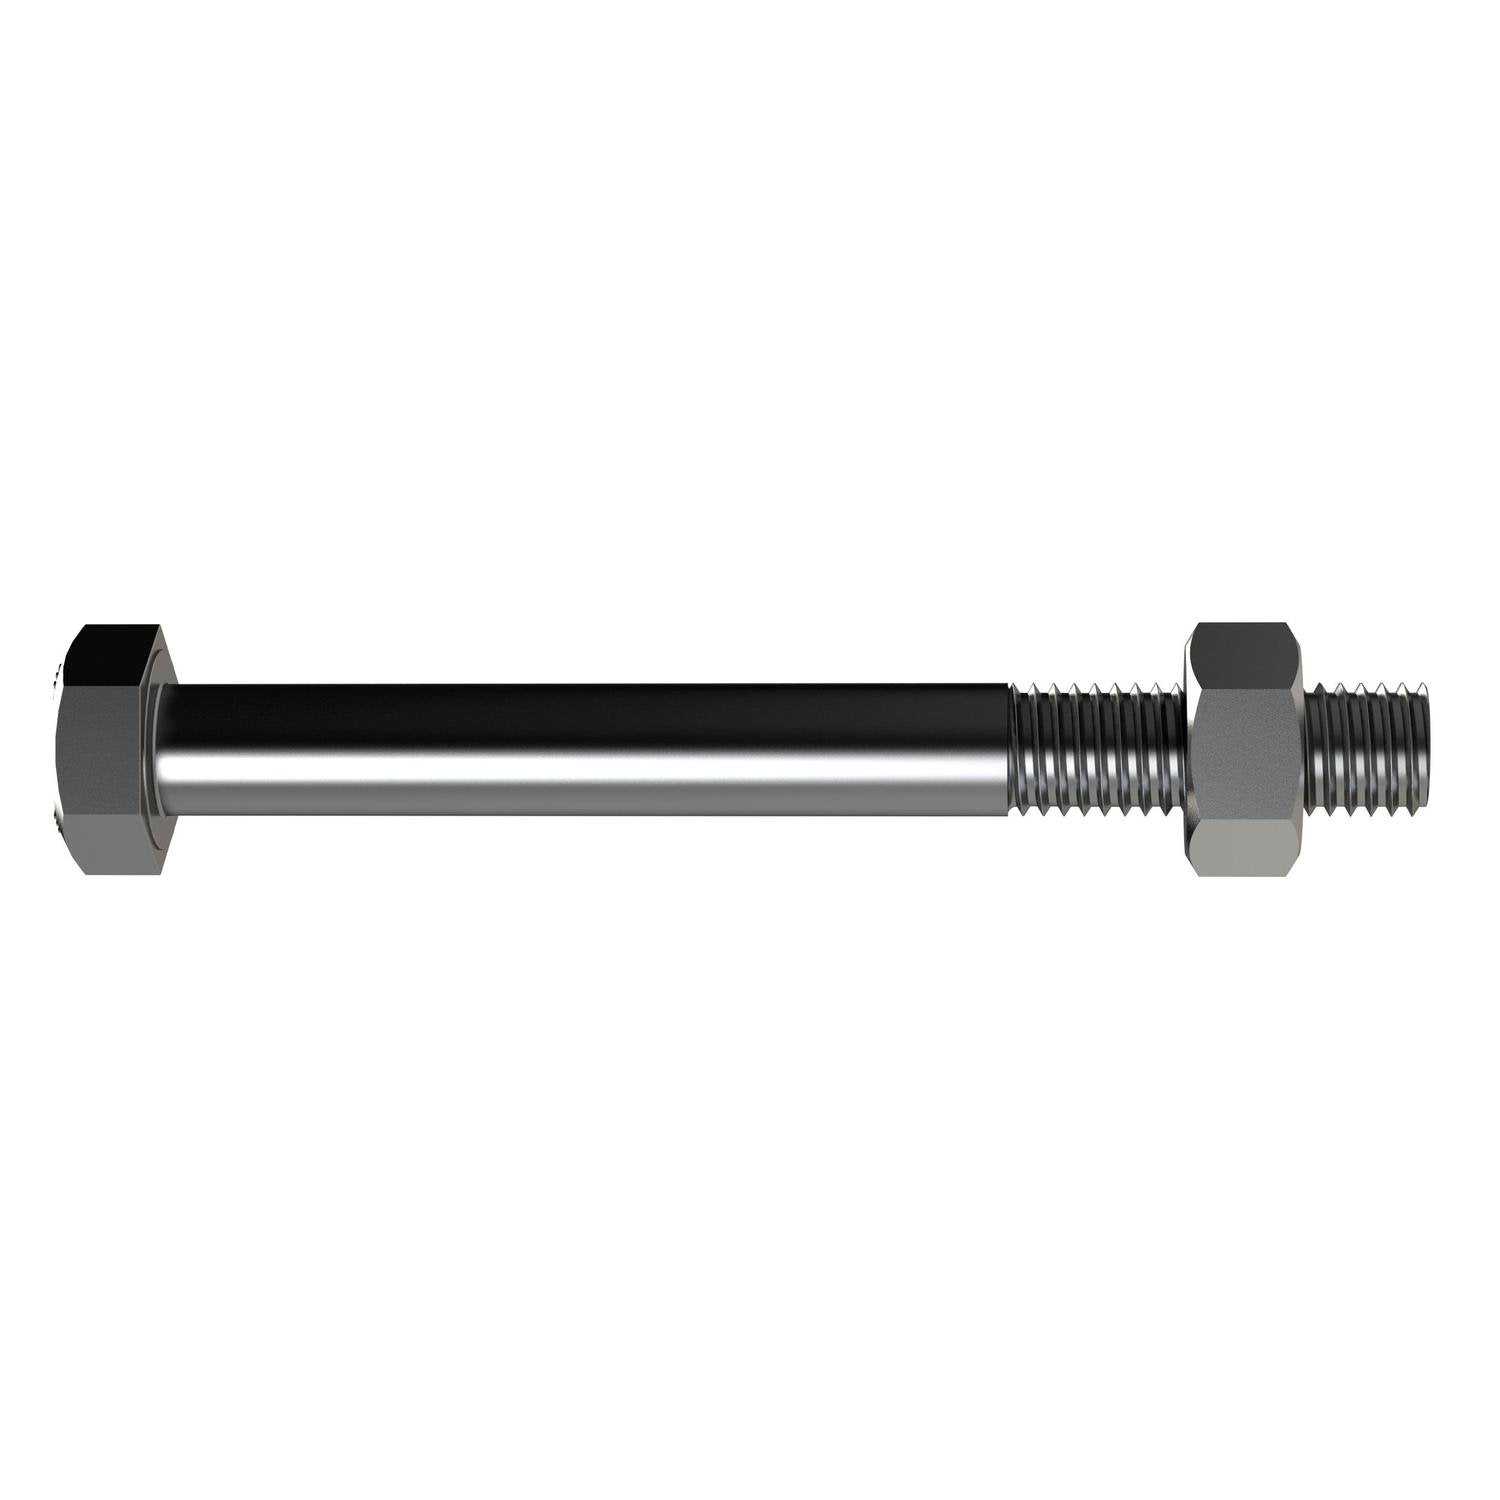 Bremick Engineer Bolt & Nut M16 X 220Mm Stainless Steel